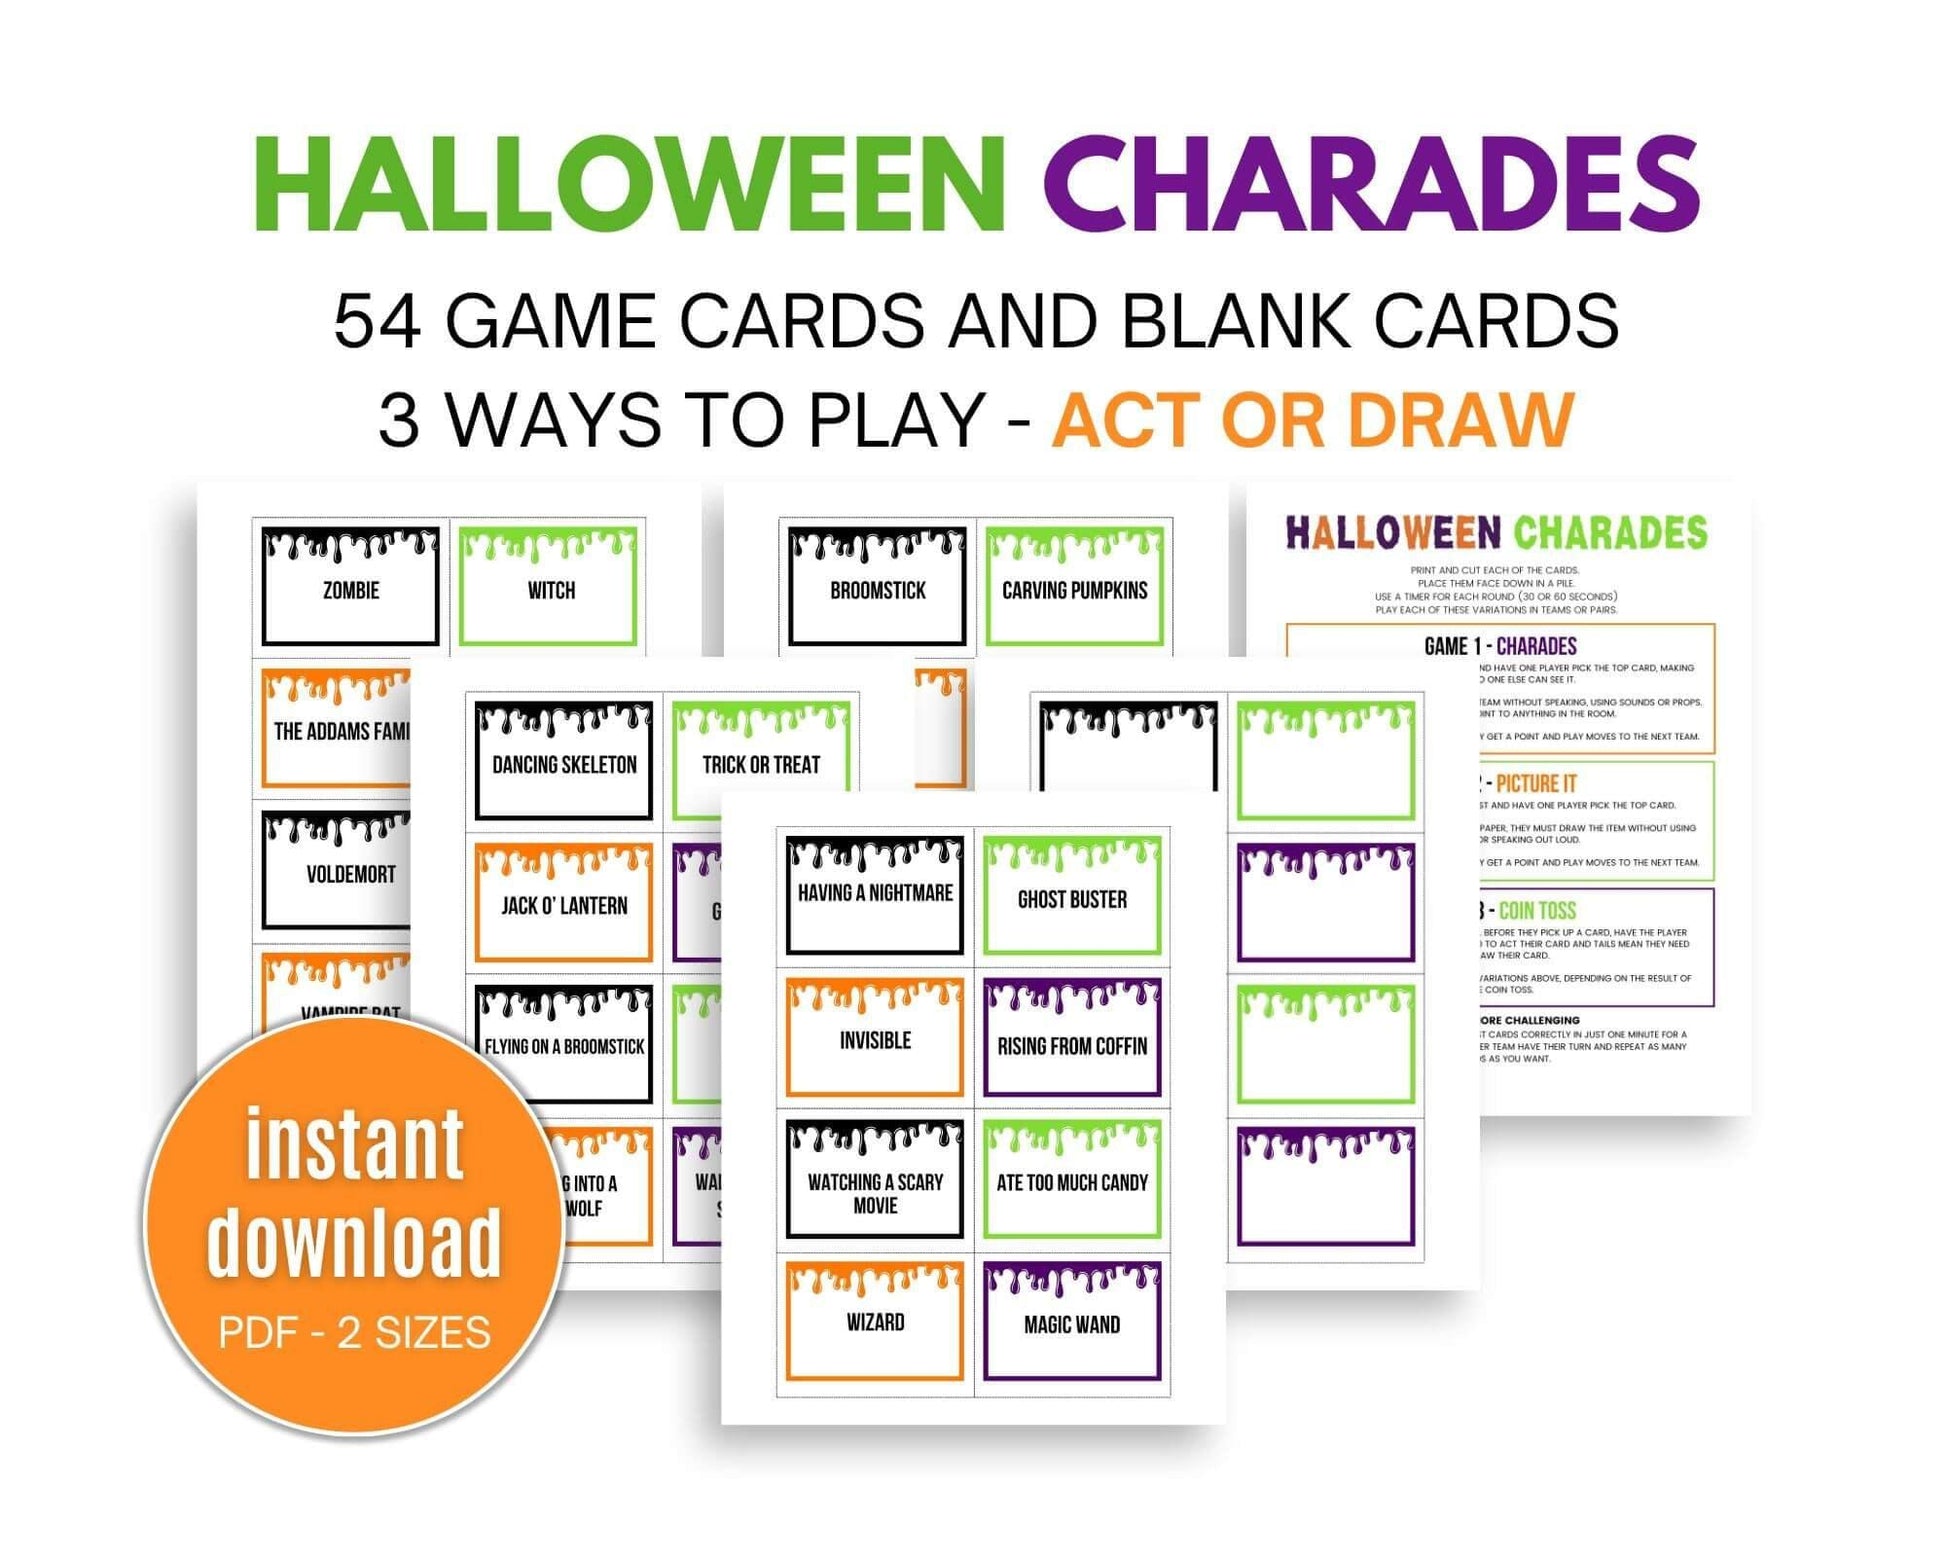 Halloween Charades Game - Simplify Create Inspire